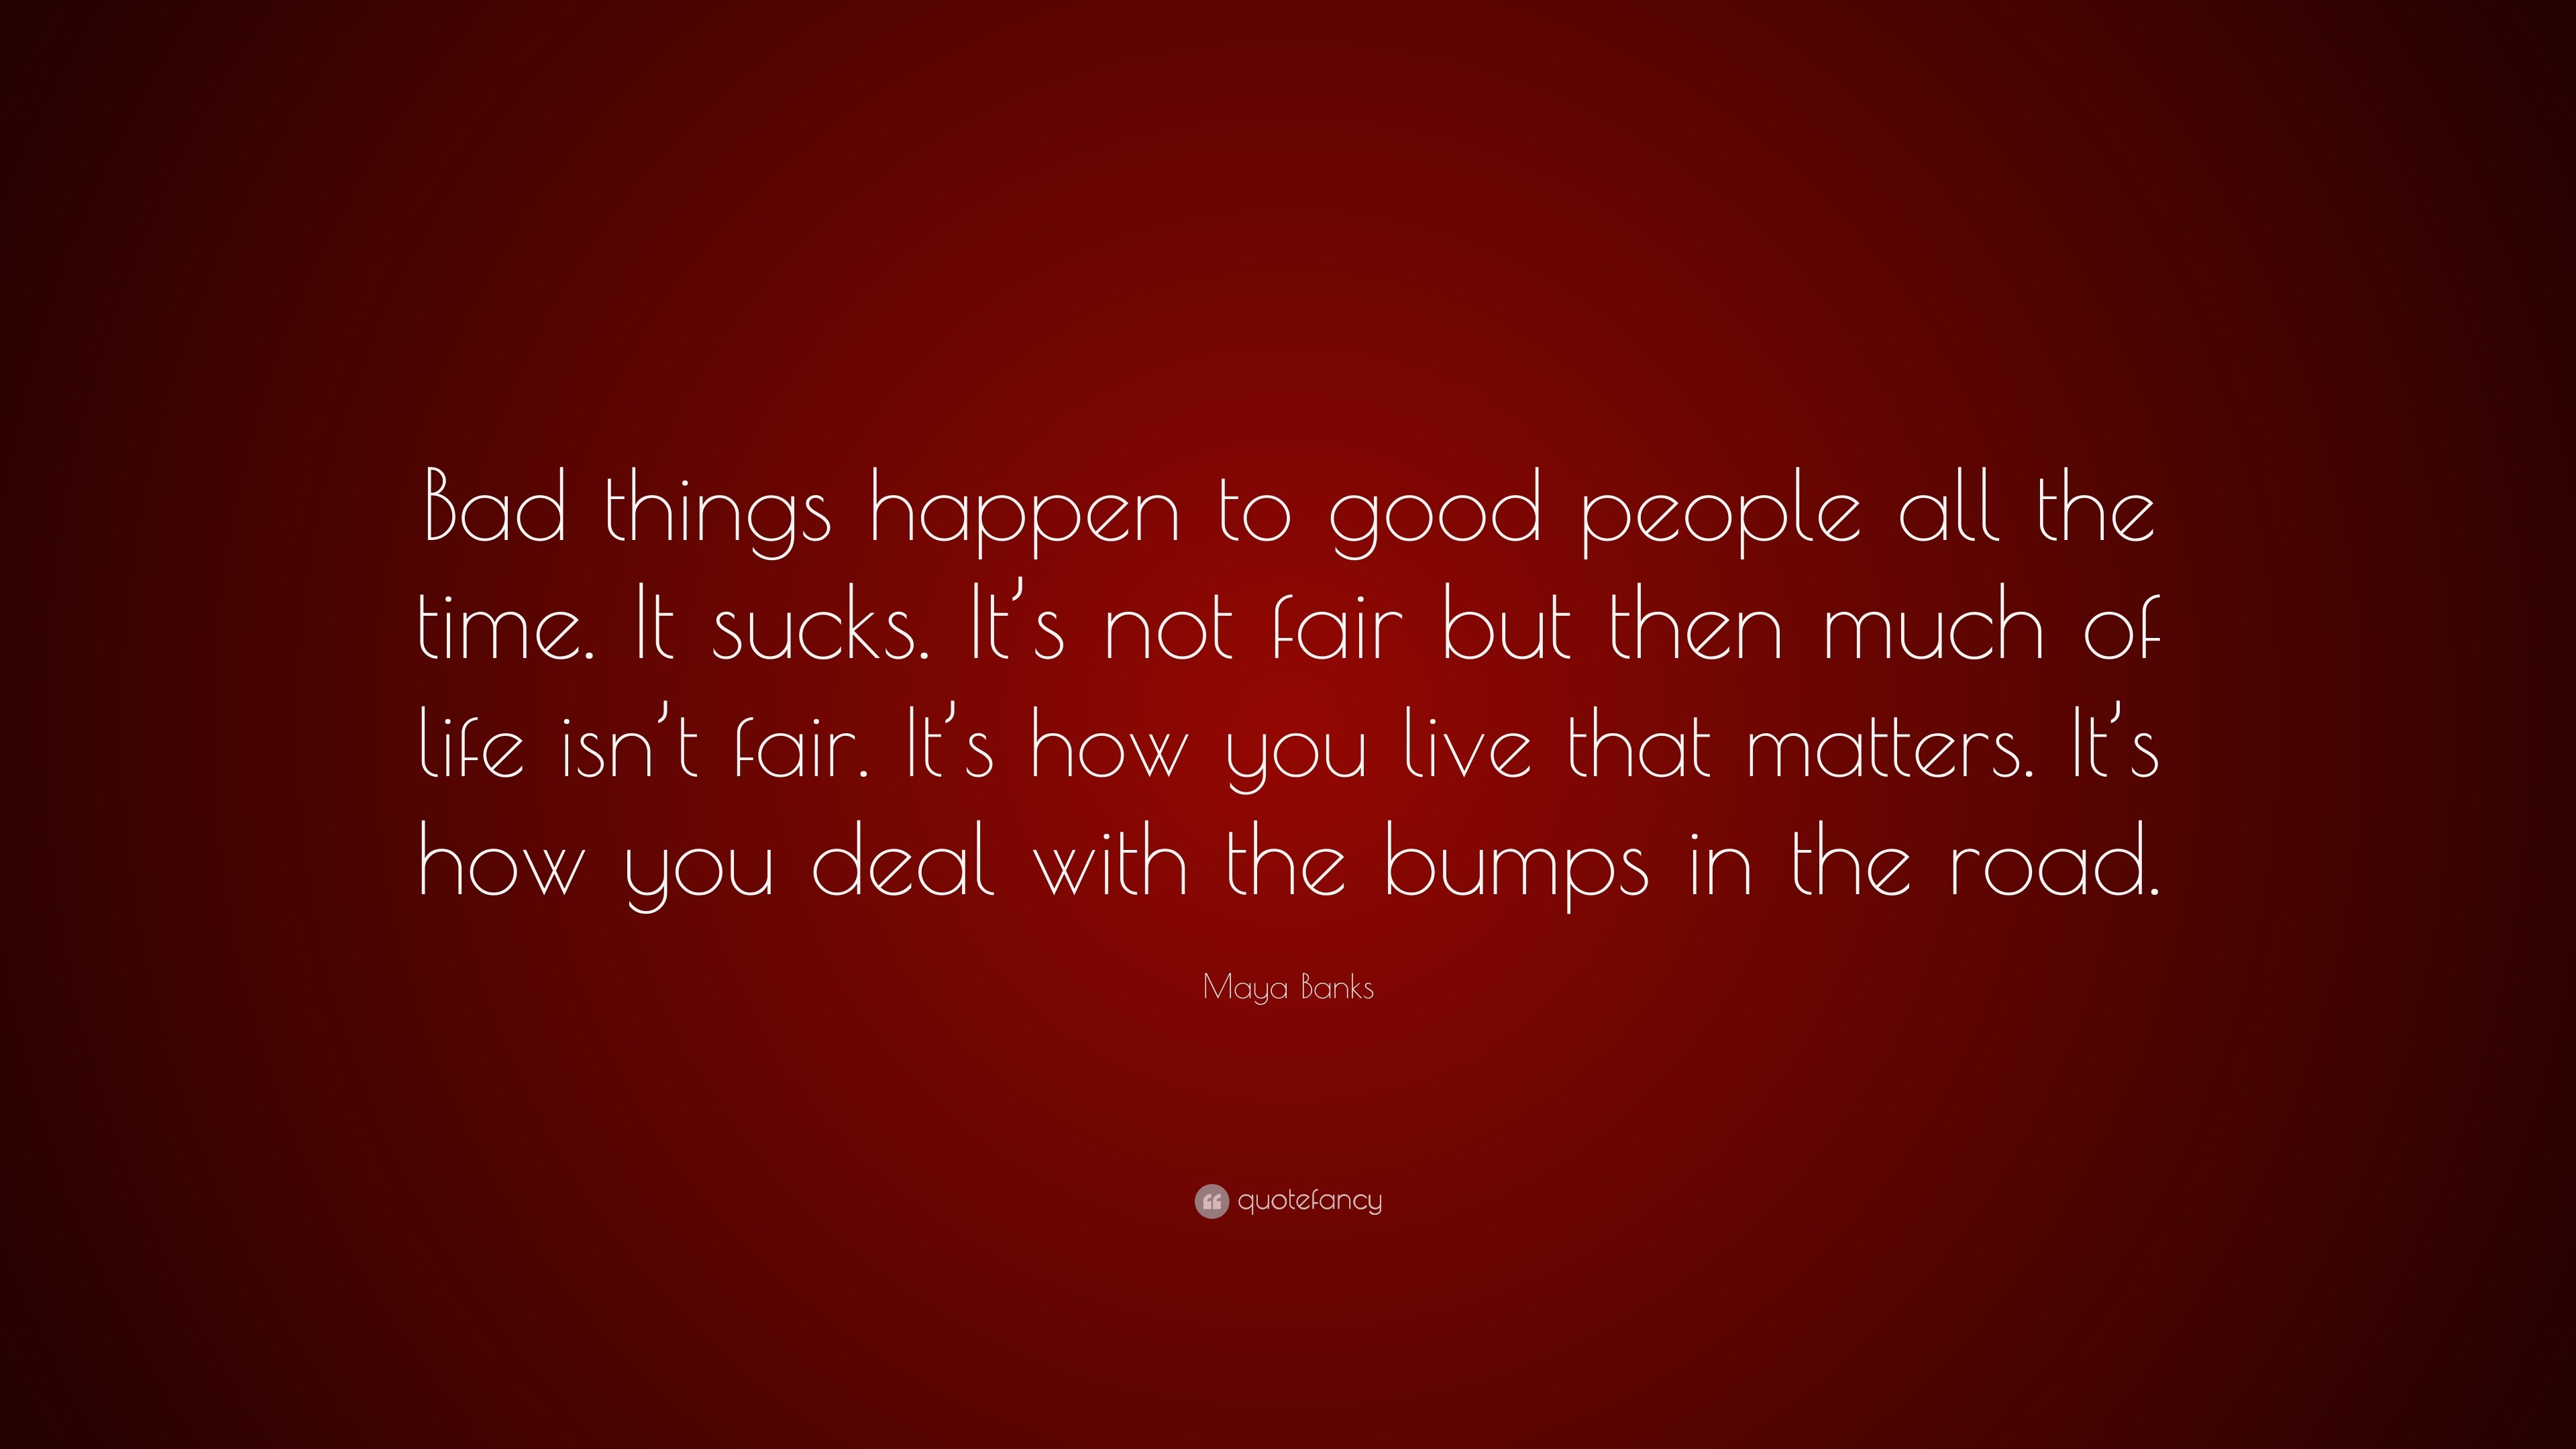 Maya Banks Quote “Bad things happen to good people all the time It